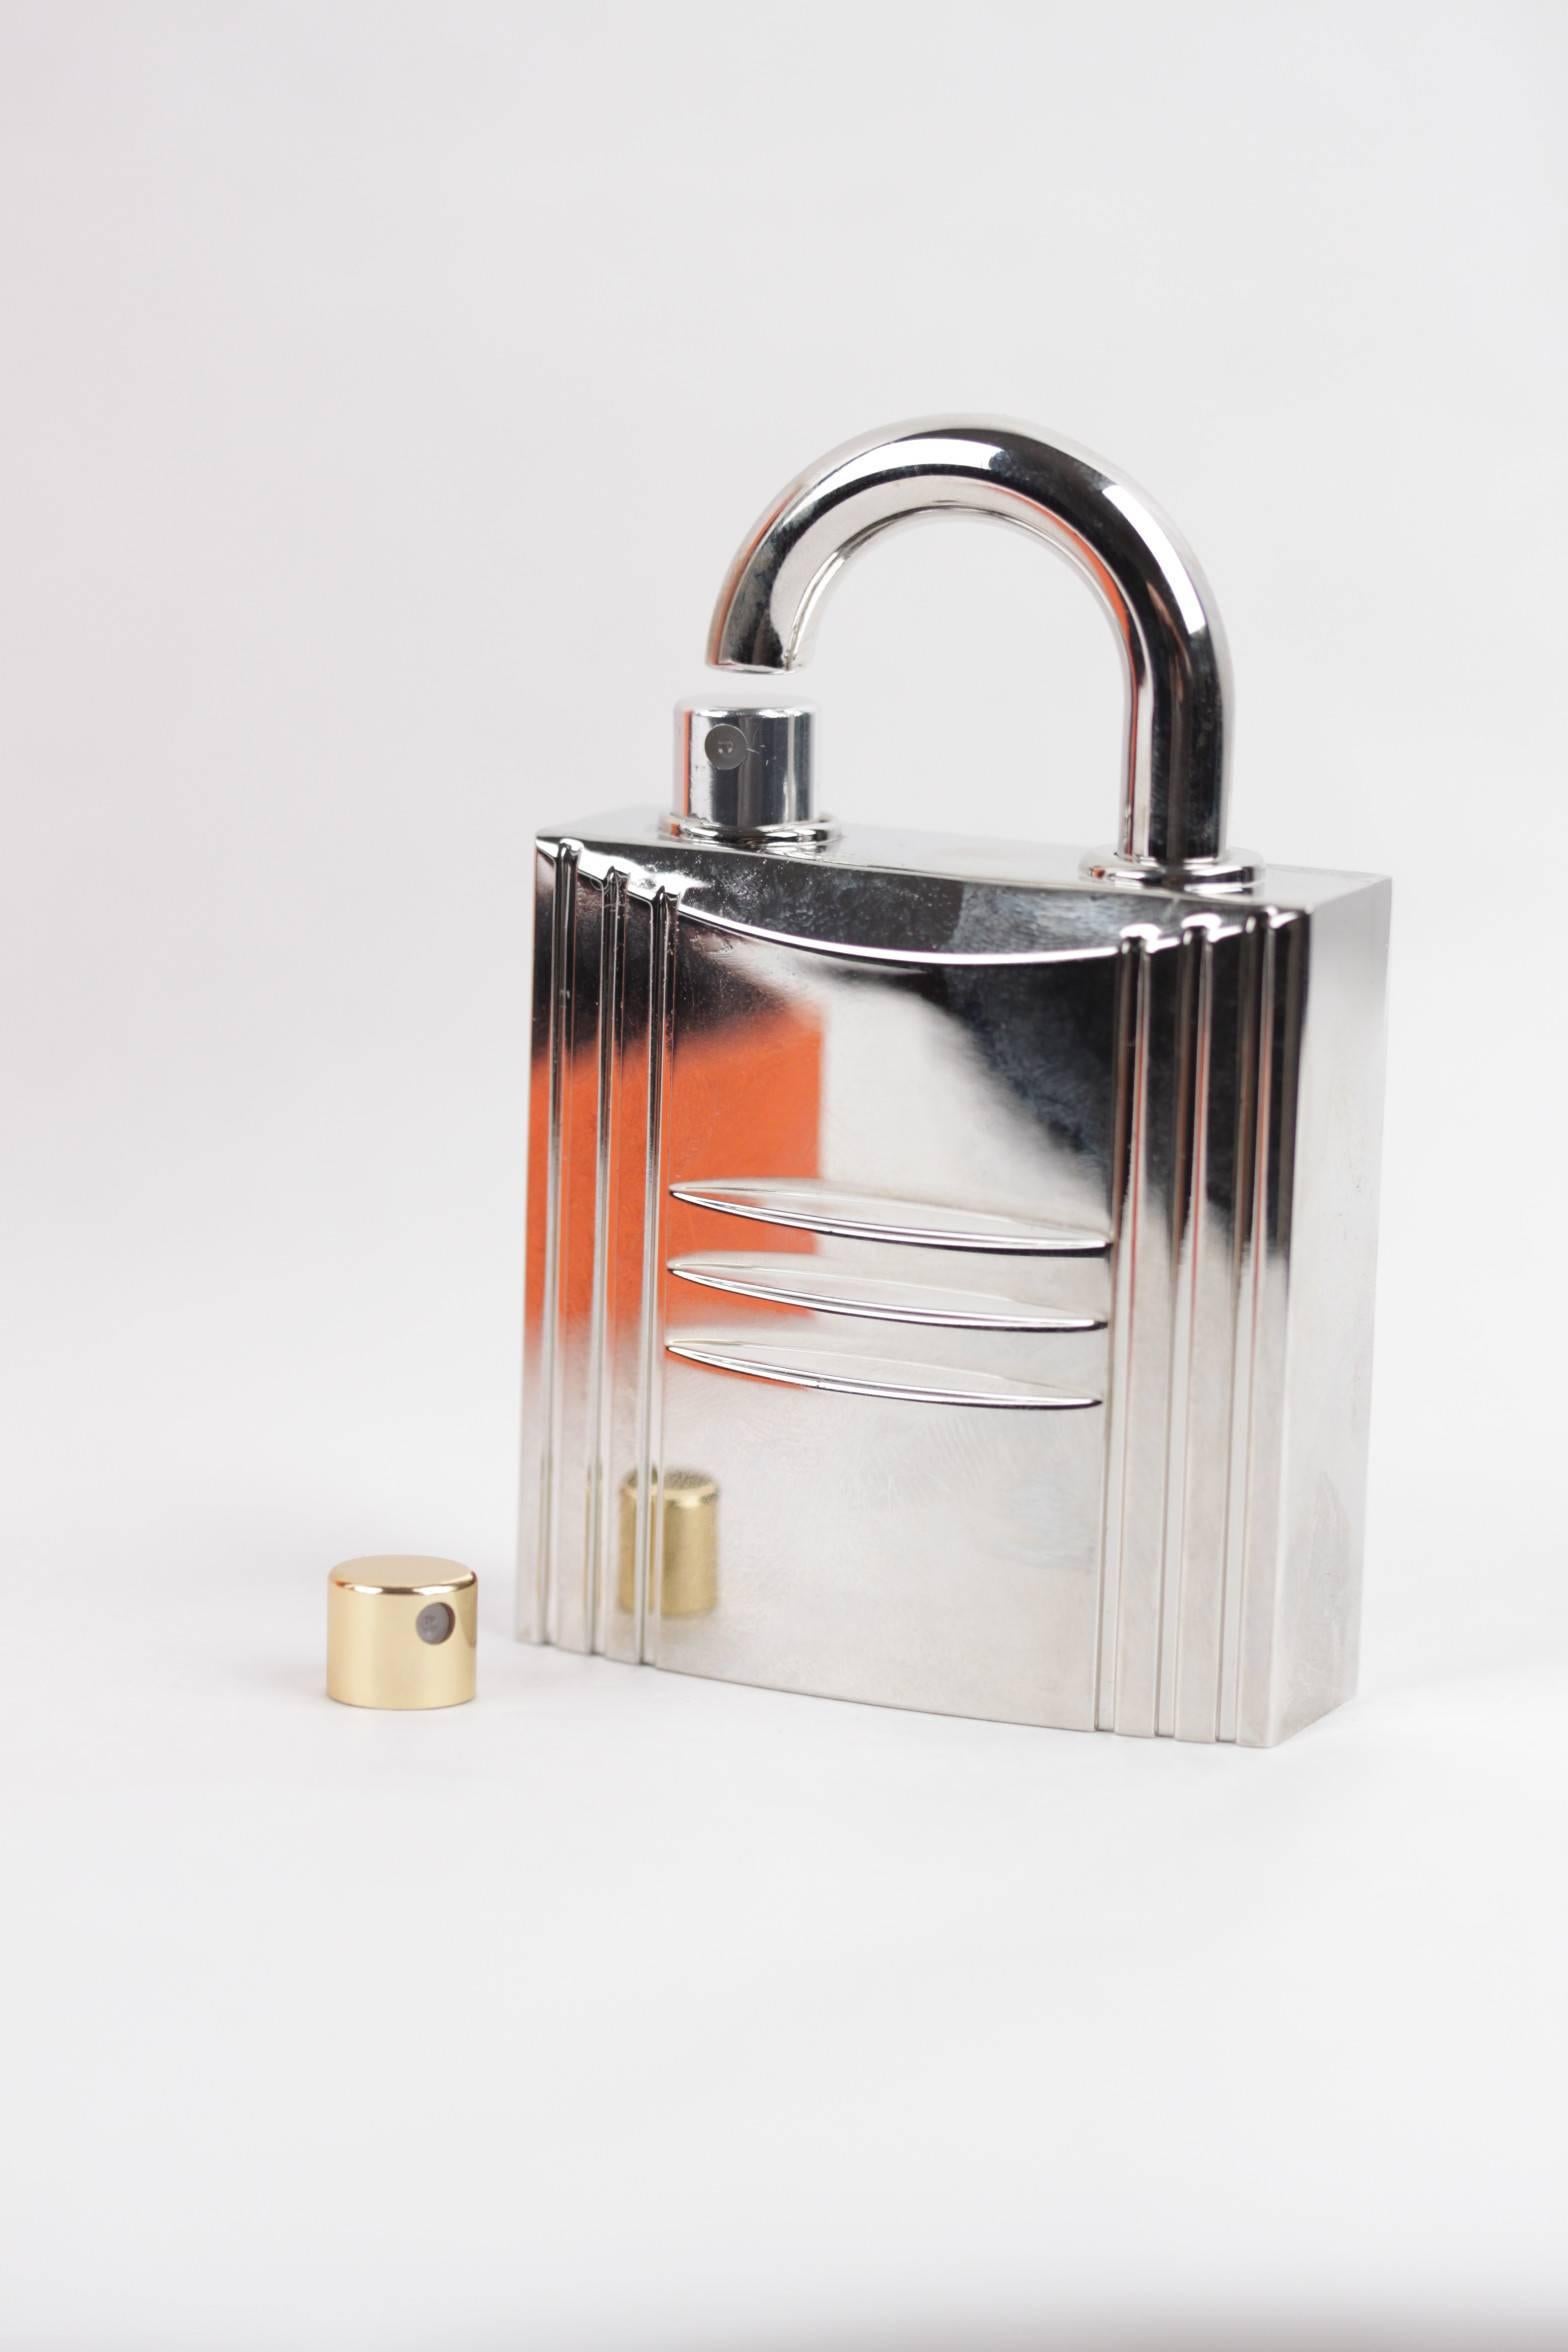  - Refillable silver & palladium plated 'Cadenas' jewel lock pure perfum spray bottle
- The bottle is crafted of shiny silver metal in the likeness of Hermes’ iconic padlock
- This smart silver padlock holds a '24 Faubourg' Pure perfume spary